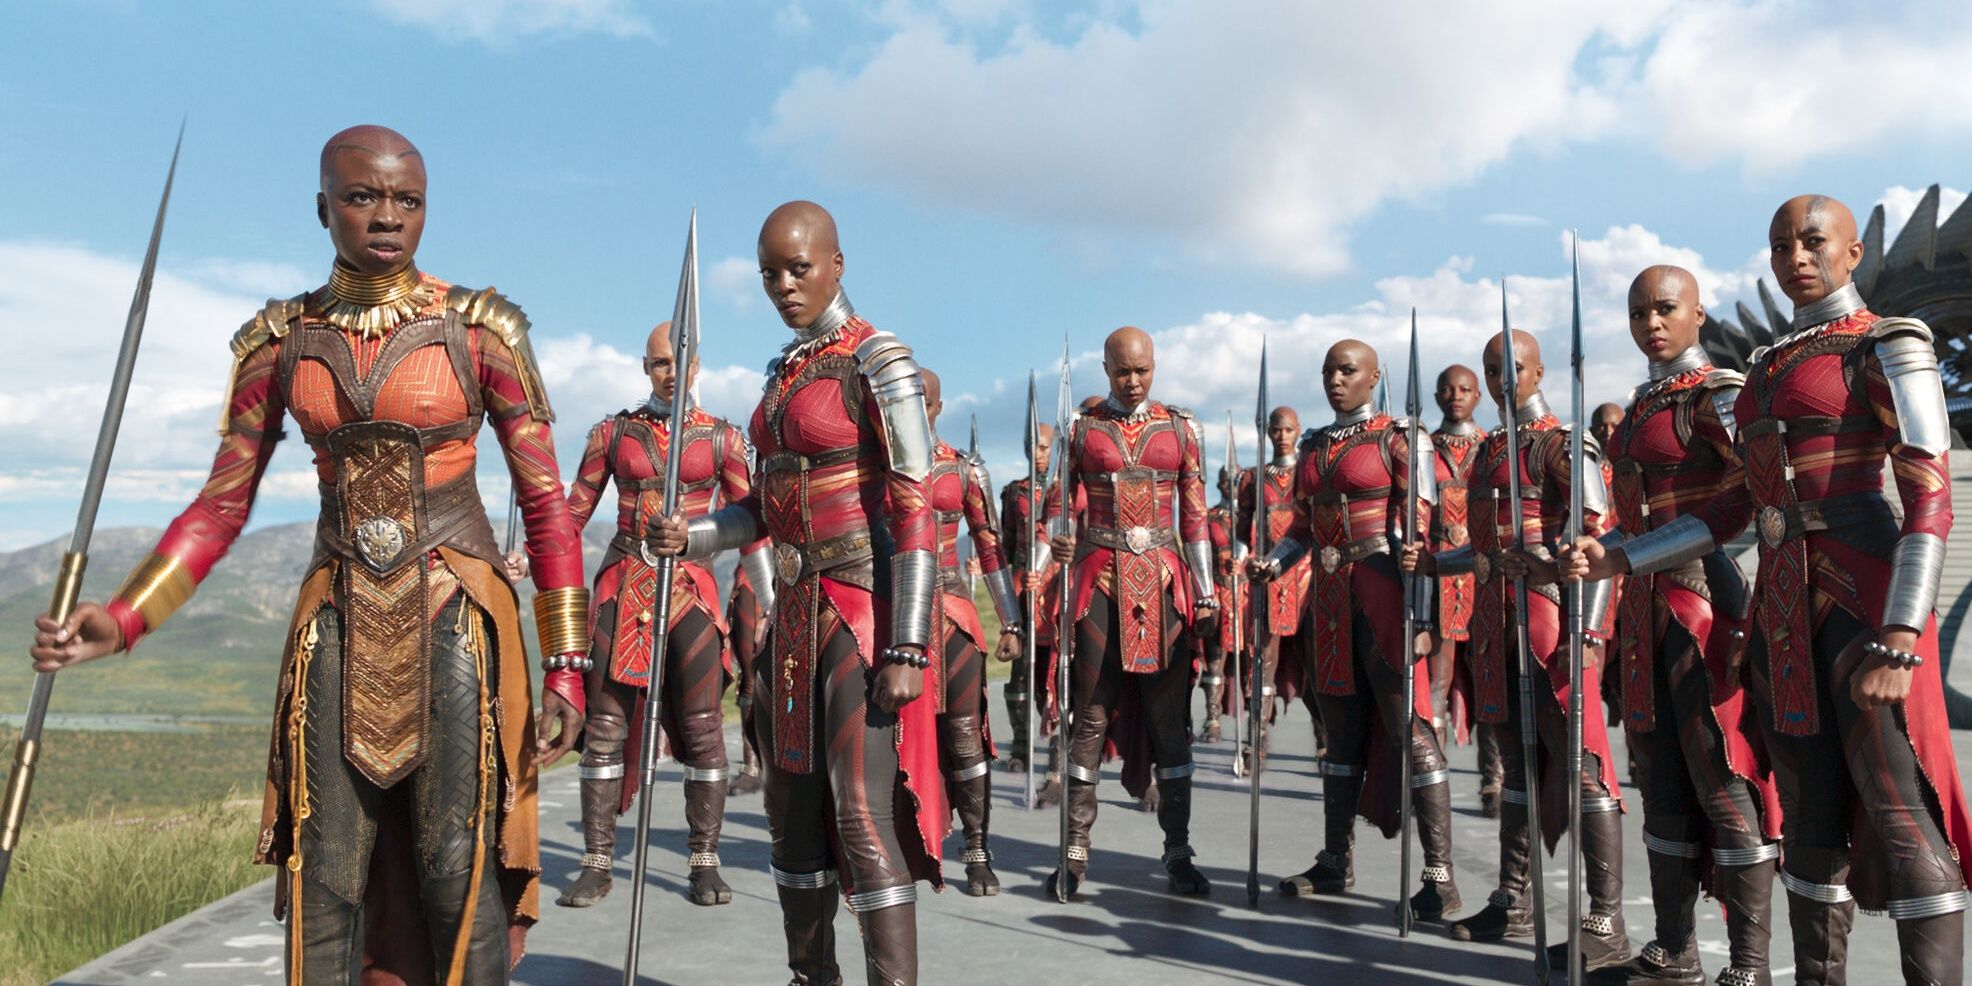 Black Panther 10 Questions About The Dora Milaje The Disney Series Needs To Answer